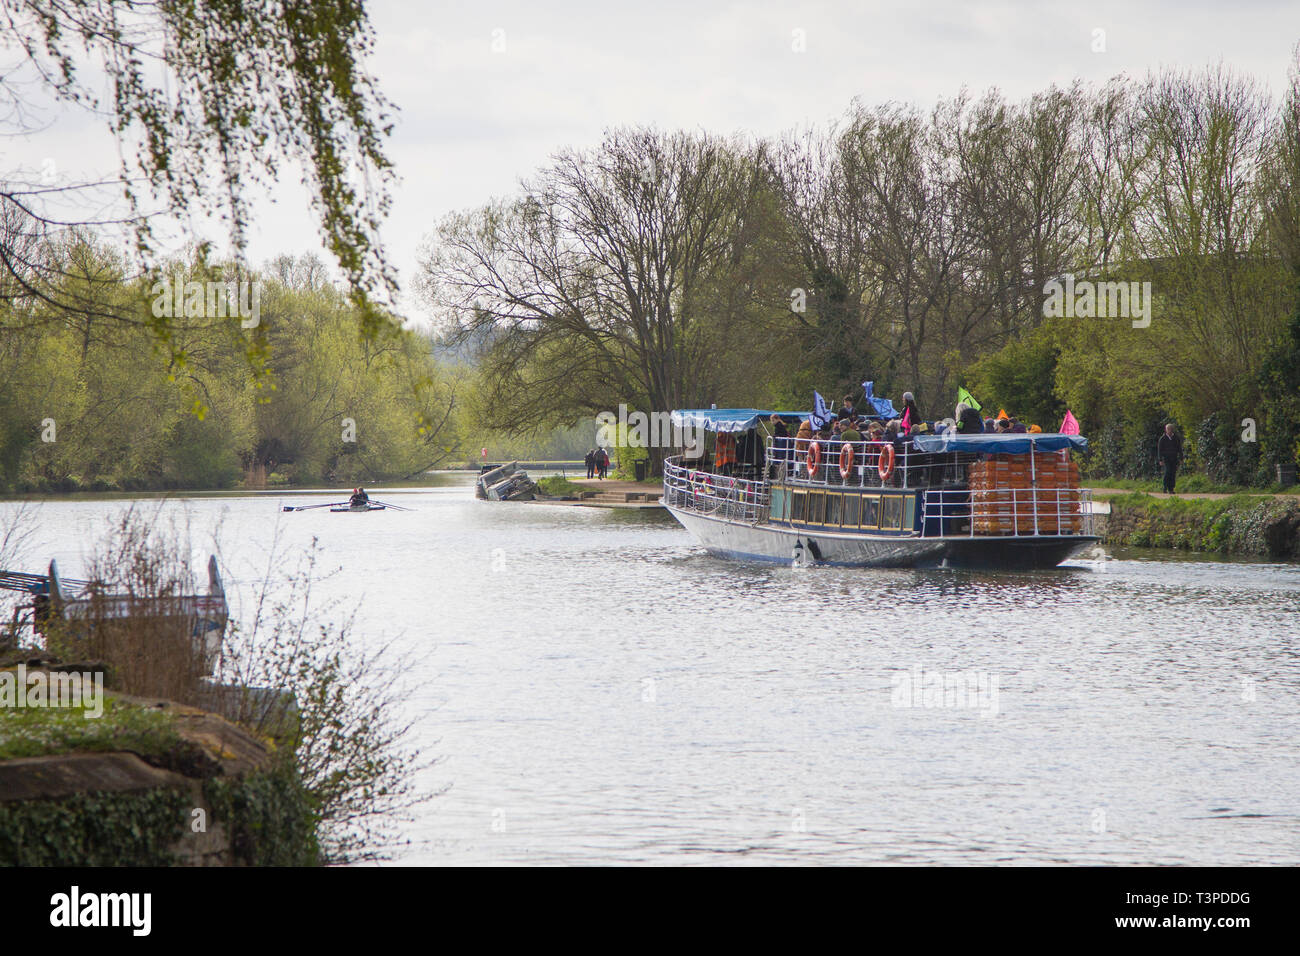 The Oxford branch of Extinction rebellion start their march to London at Folly Bridge, Oxford by taking a Steamer to Abingdon along the River Thames Stock Photo